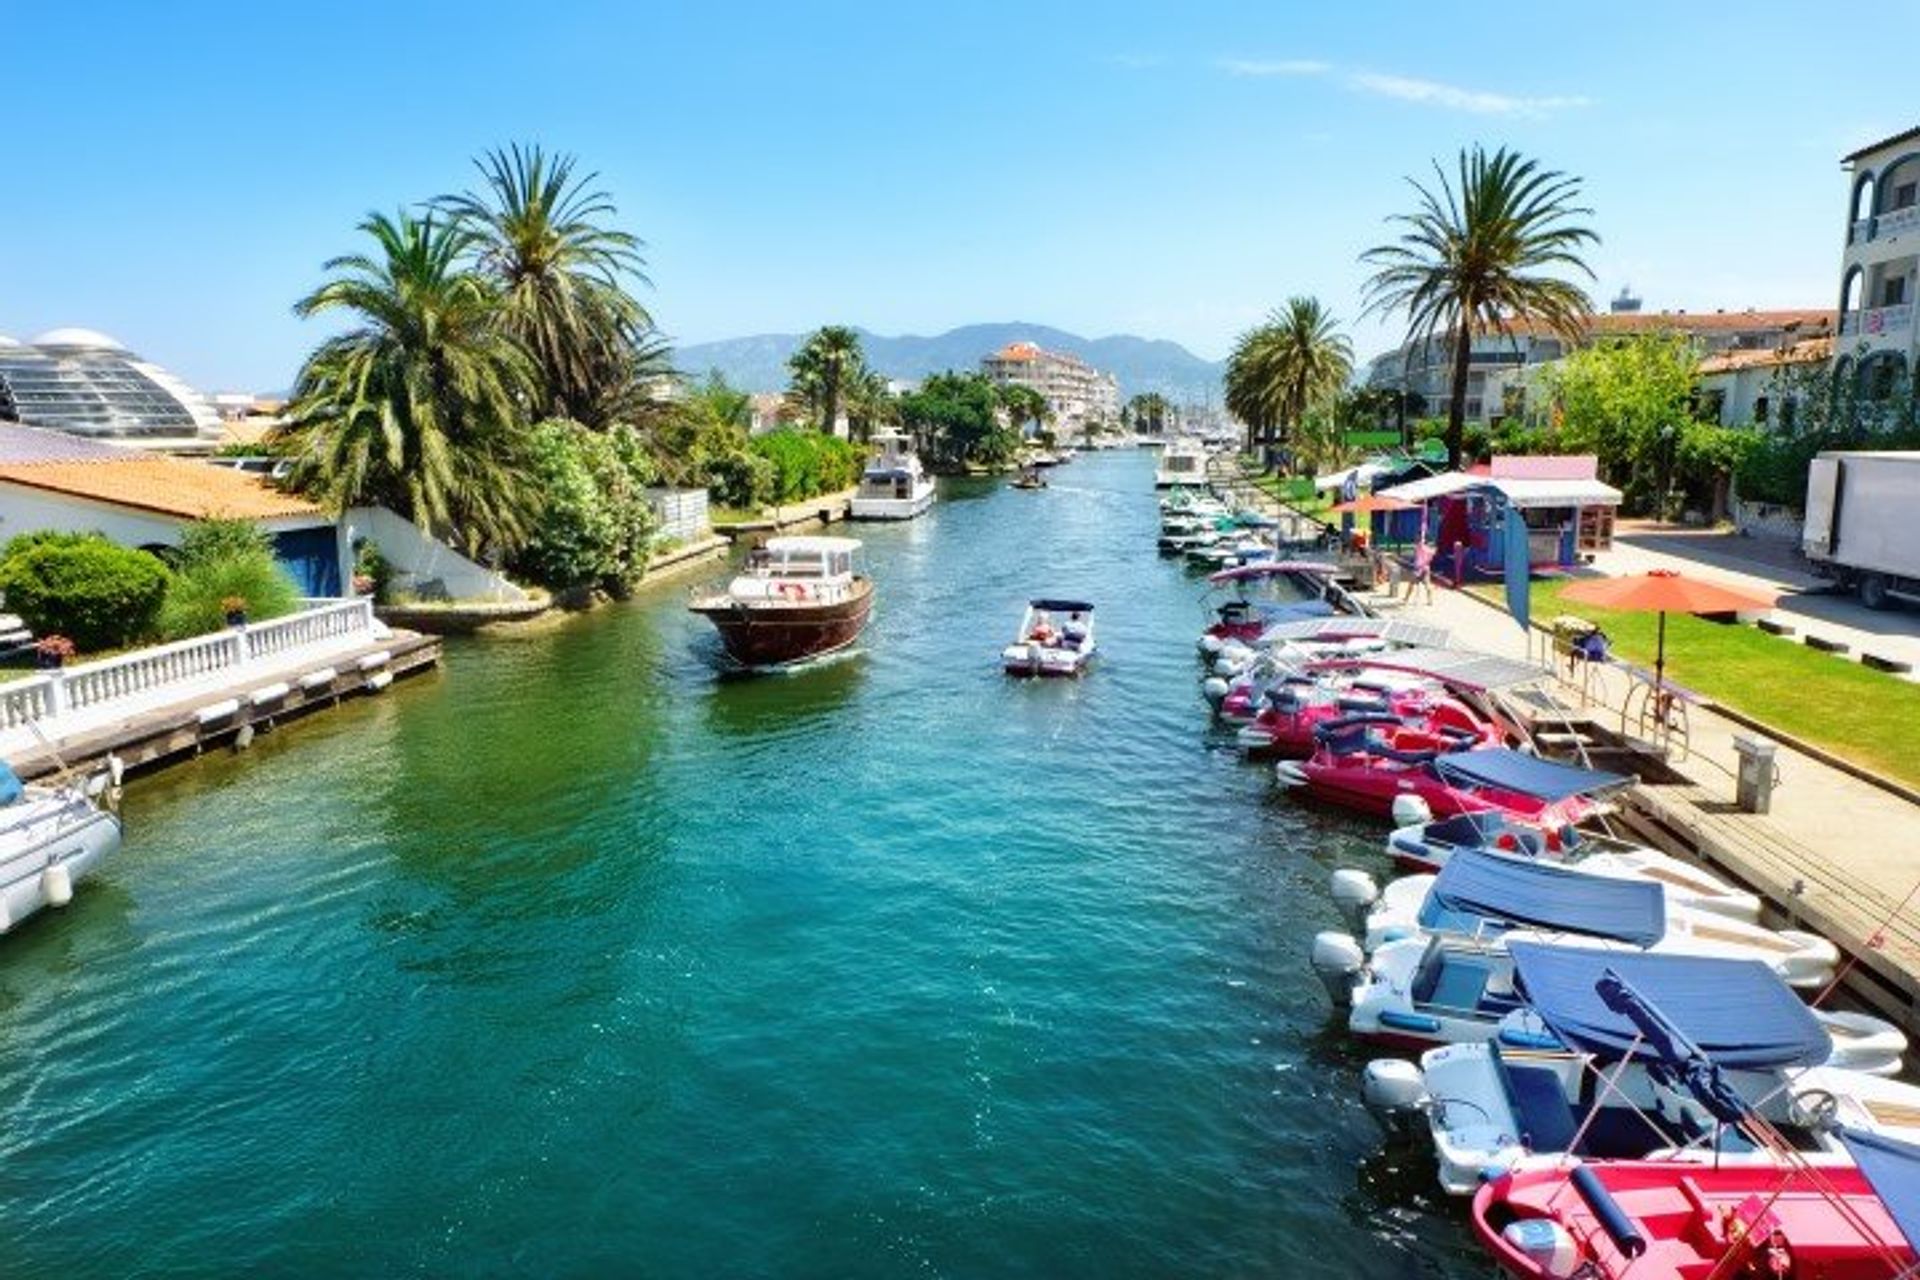 Empuriabrava is one of the youngest destinations on the Costa Brava